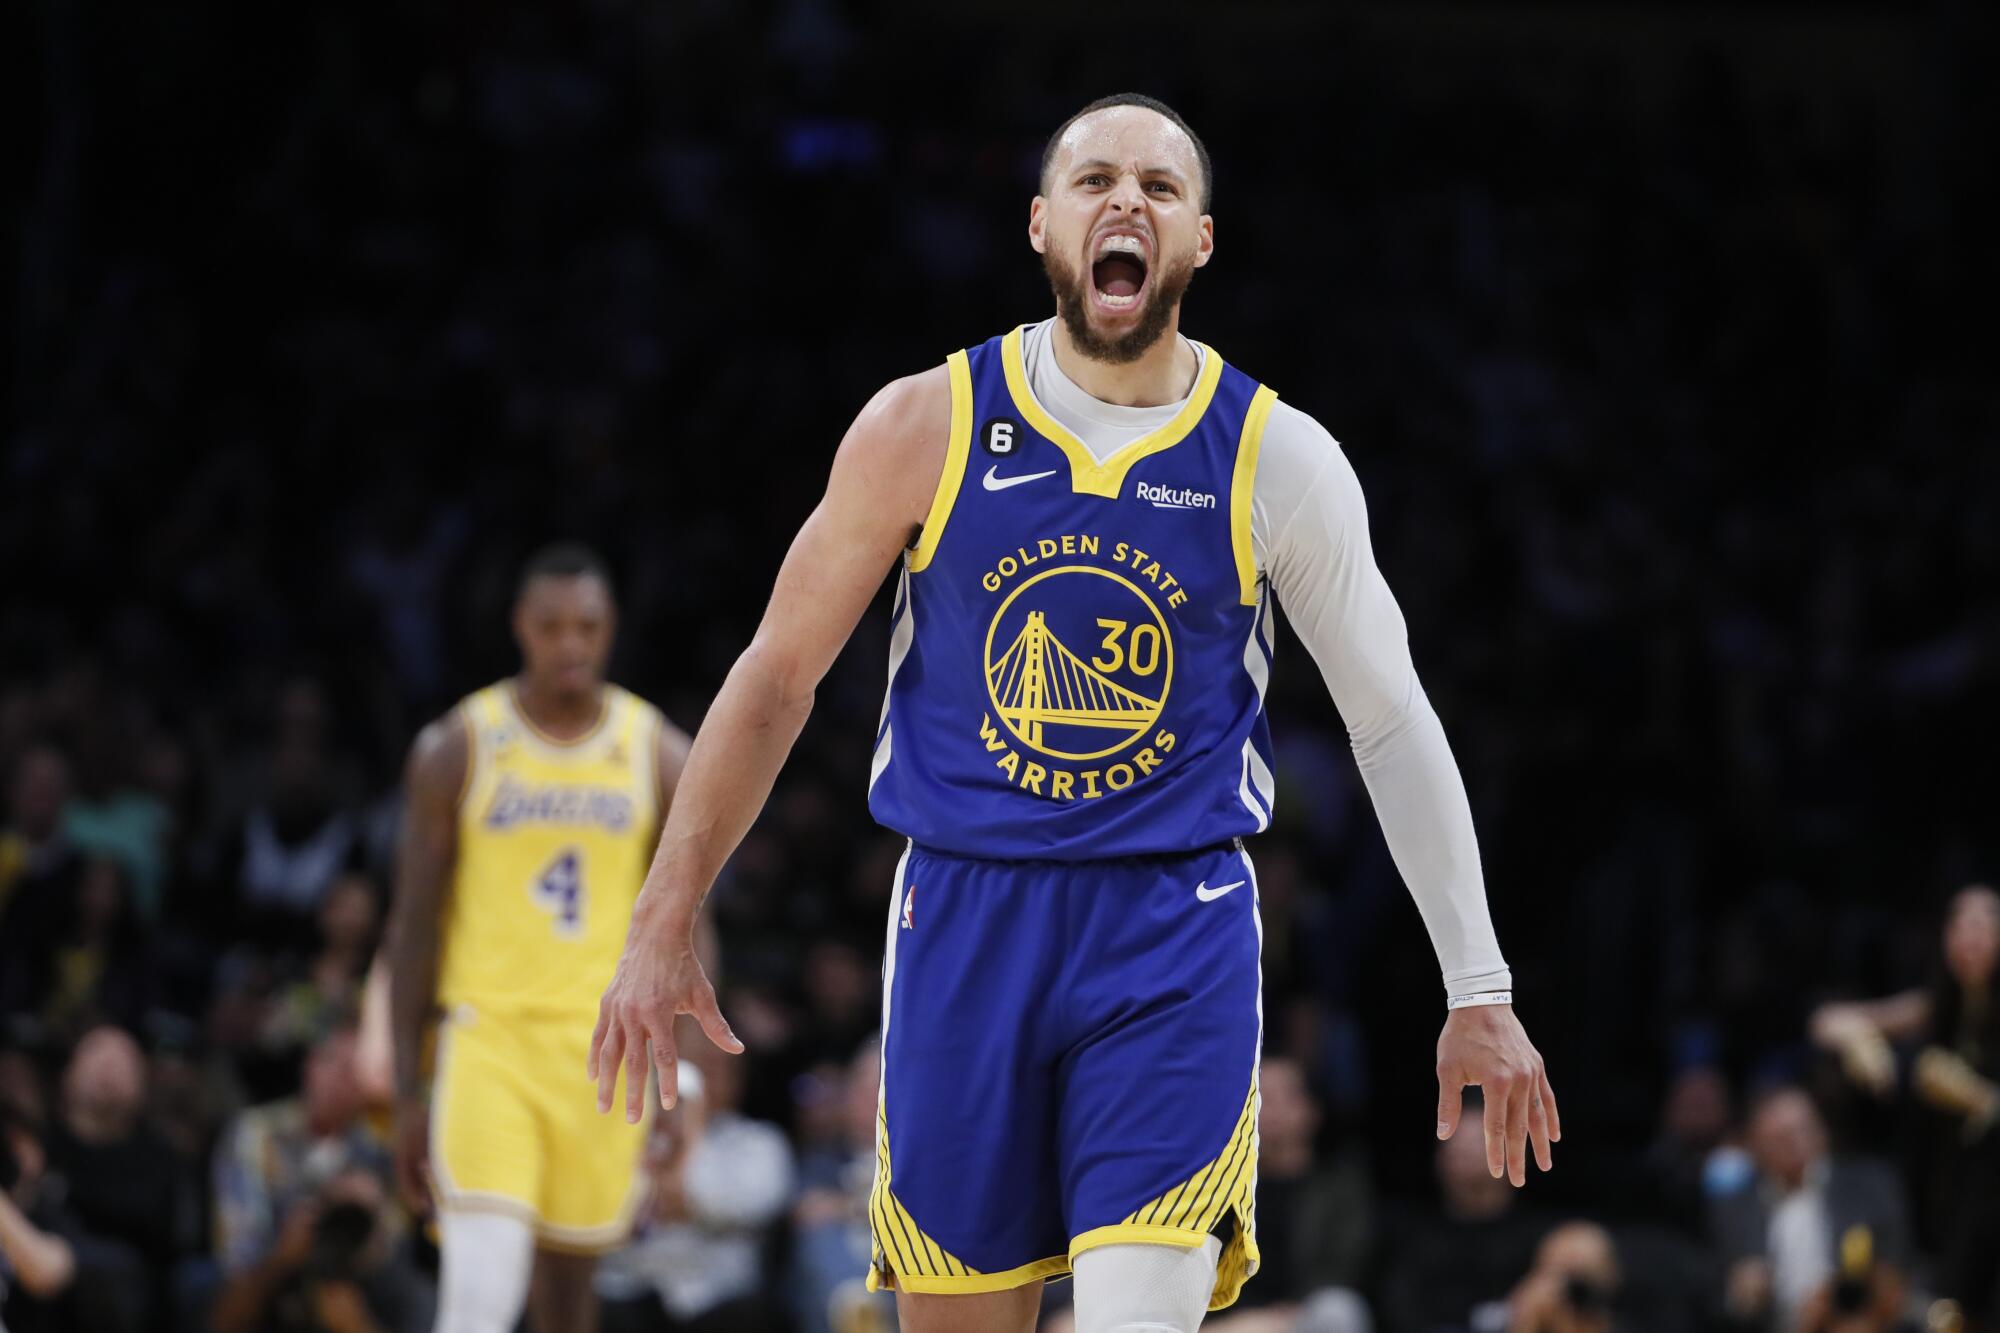 Warriors guard Stephen Curry yells out after hitting a three-pointer late in the game.